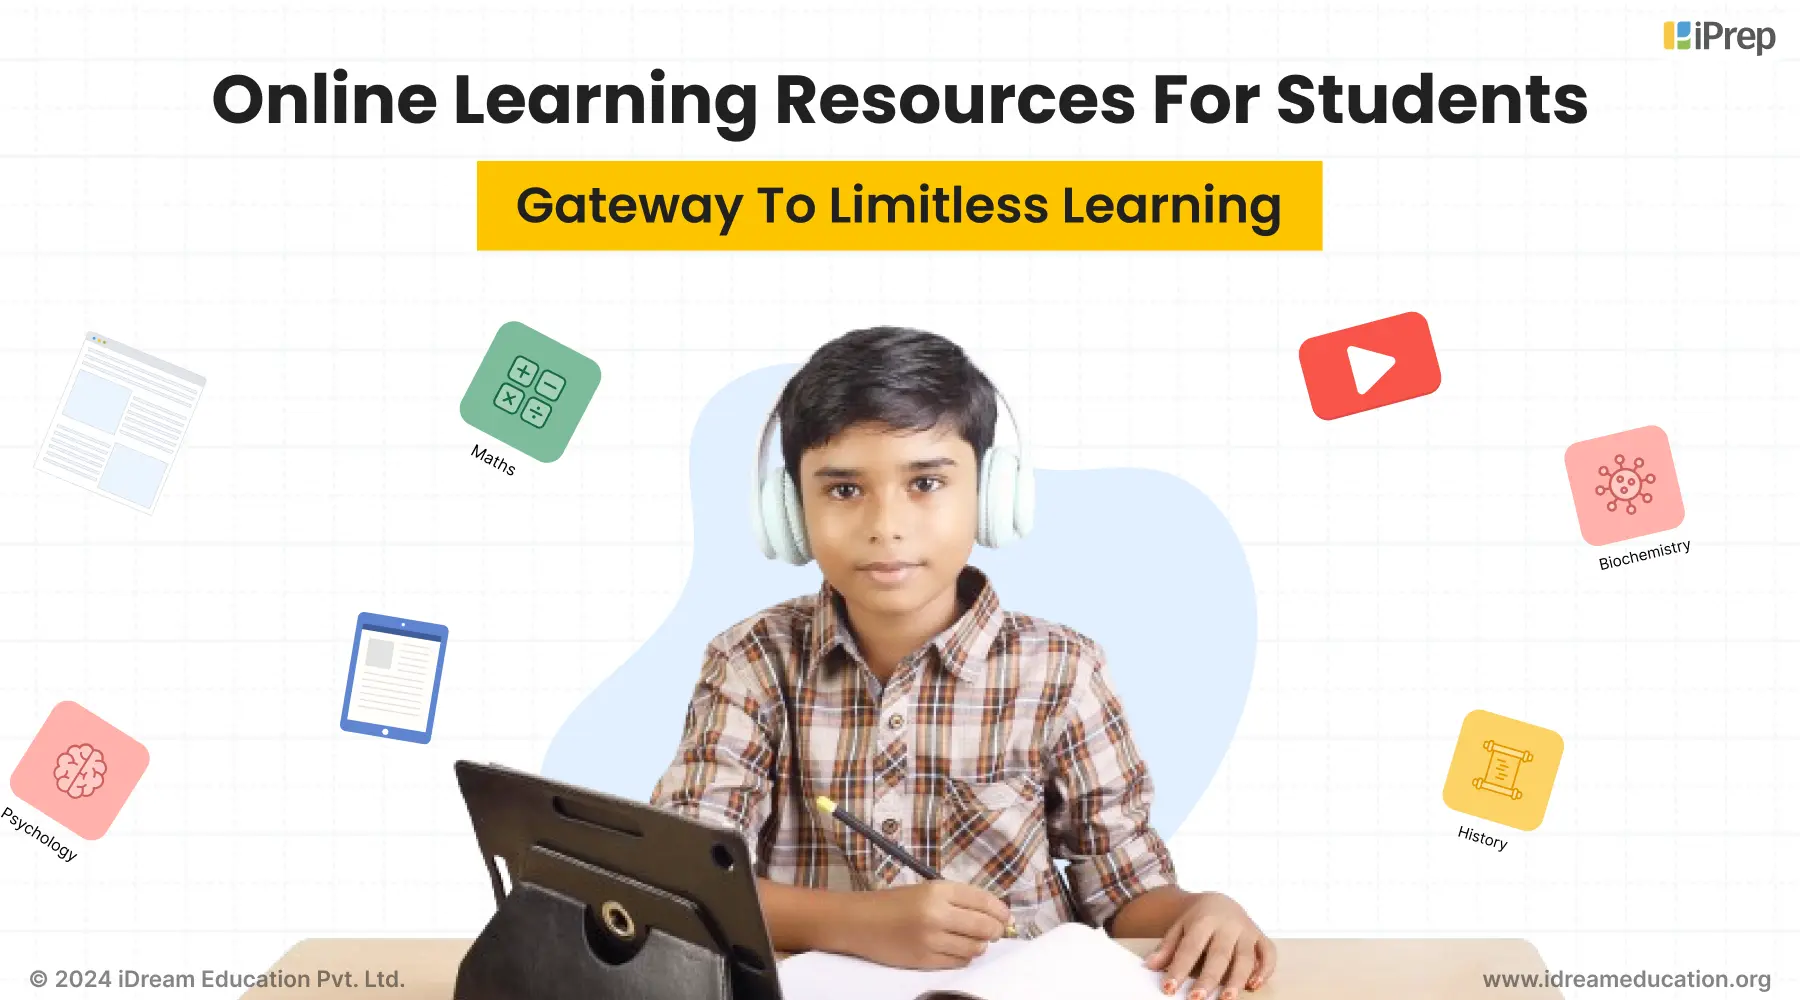 An image depicting the online learning resources for students that creates a gateway of limitless learning